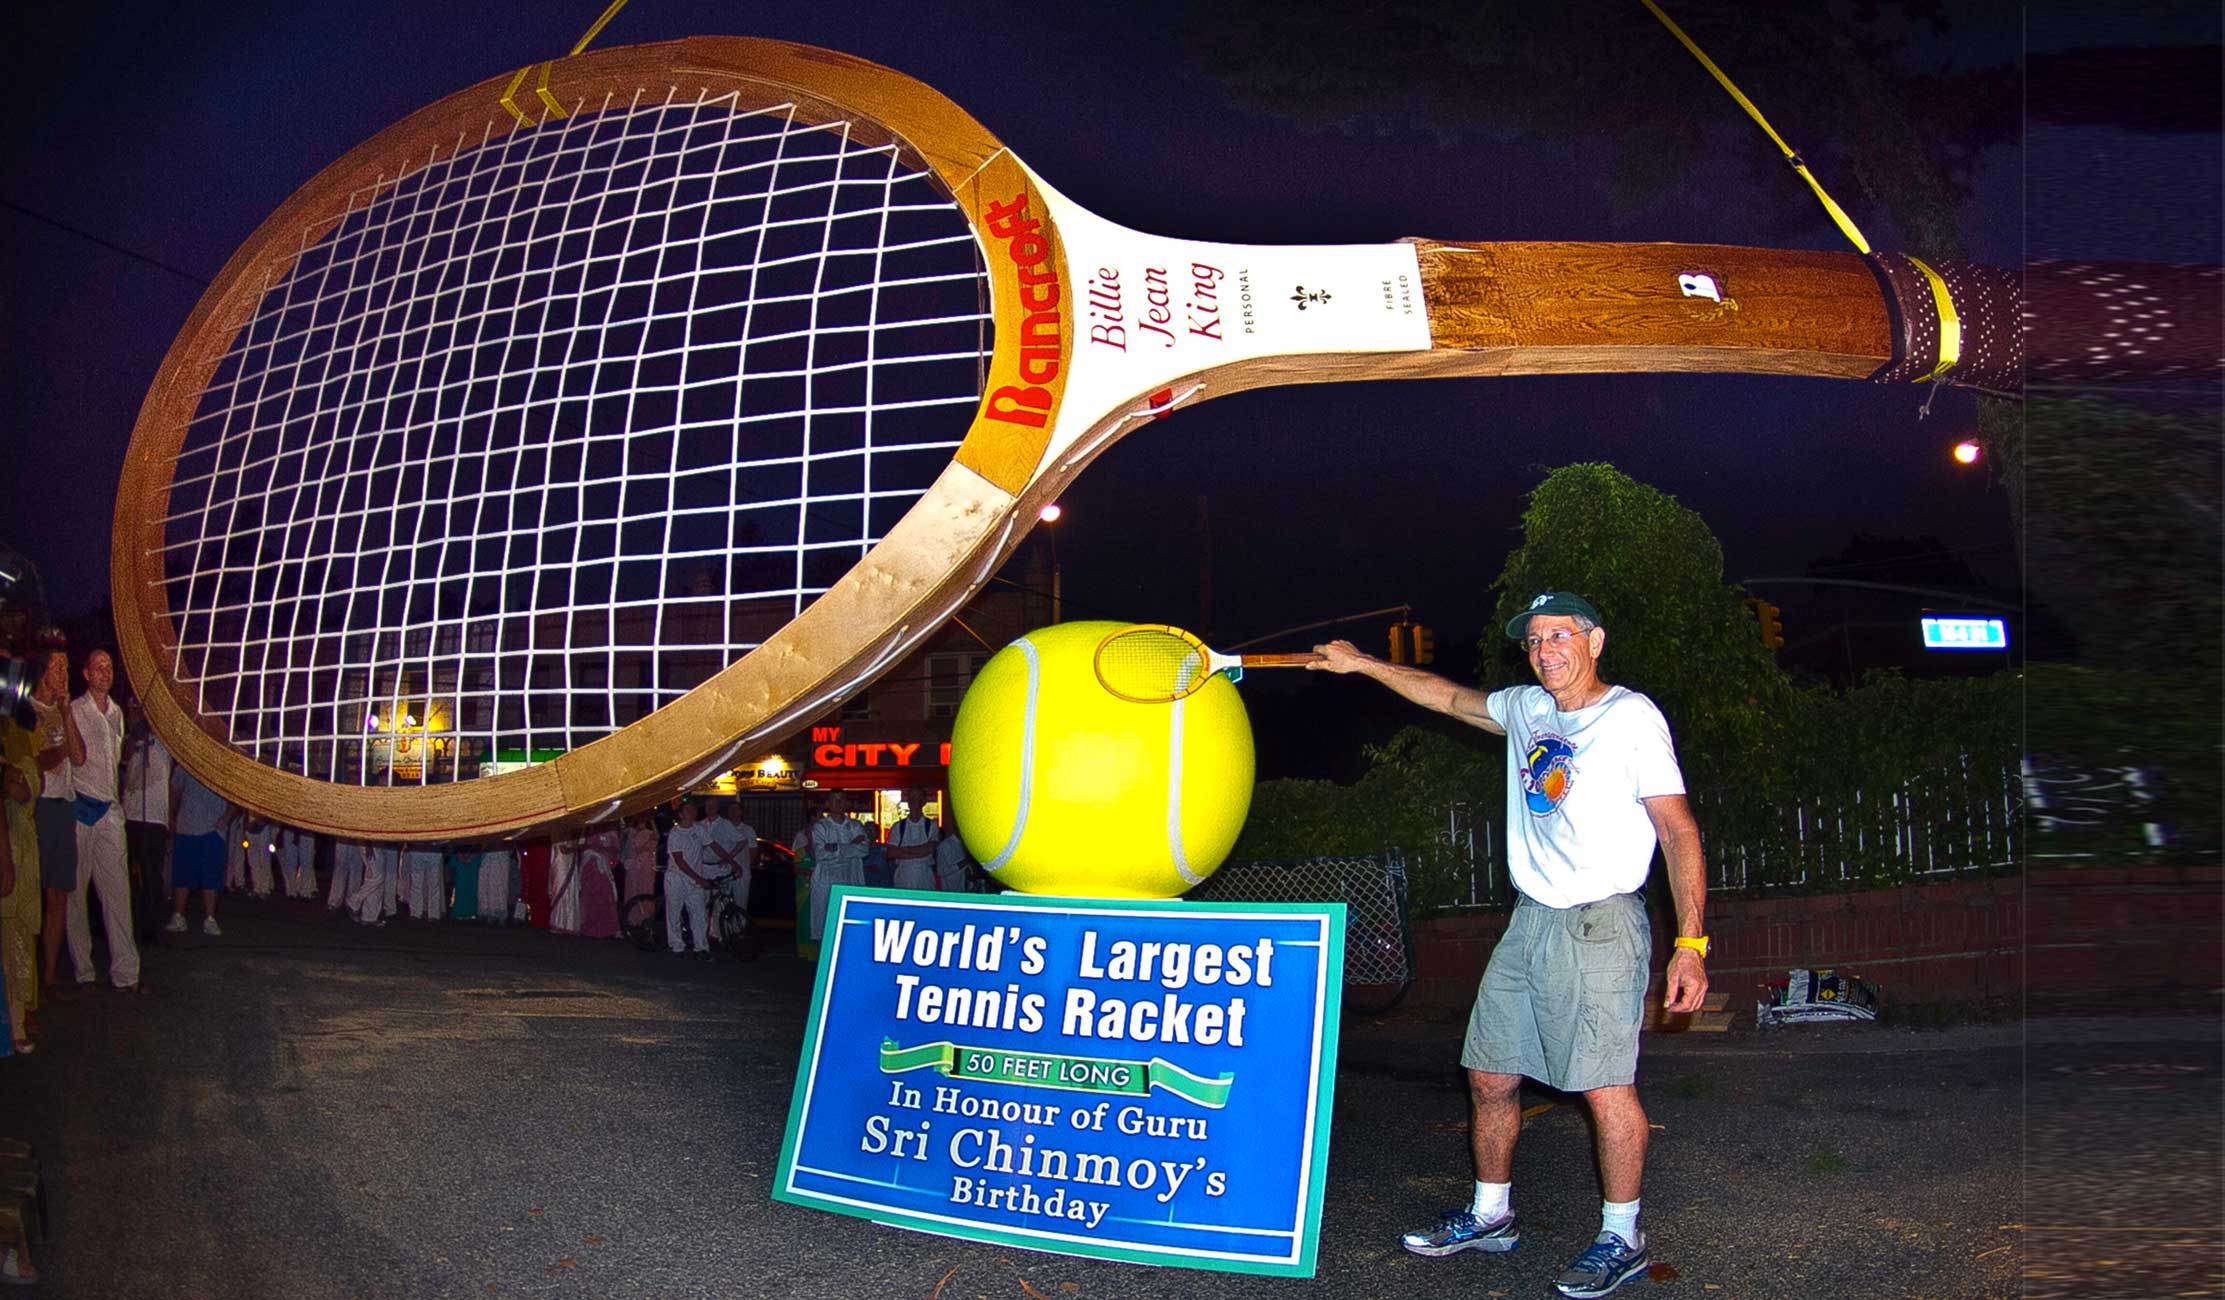 Tennis Racket, world's largest, in honour of Sri Chinmoy's 81st birth anniversary, 50 ft. 3.07 in. long, 16 ft. 8.6 in. wide, New York, August 27, 2012